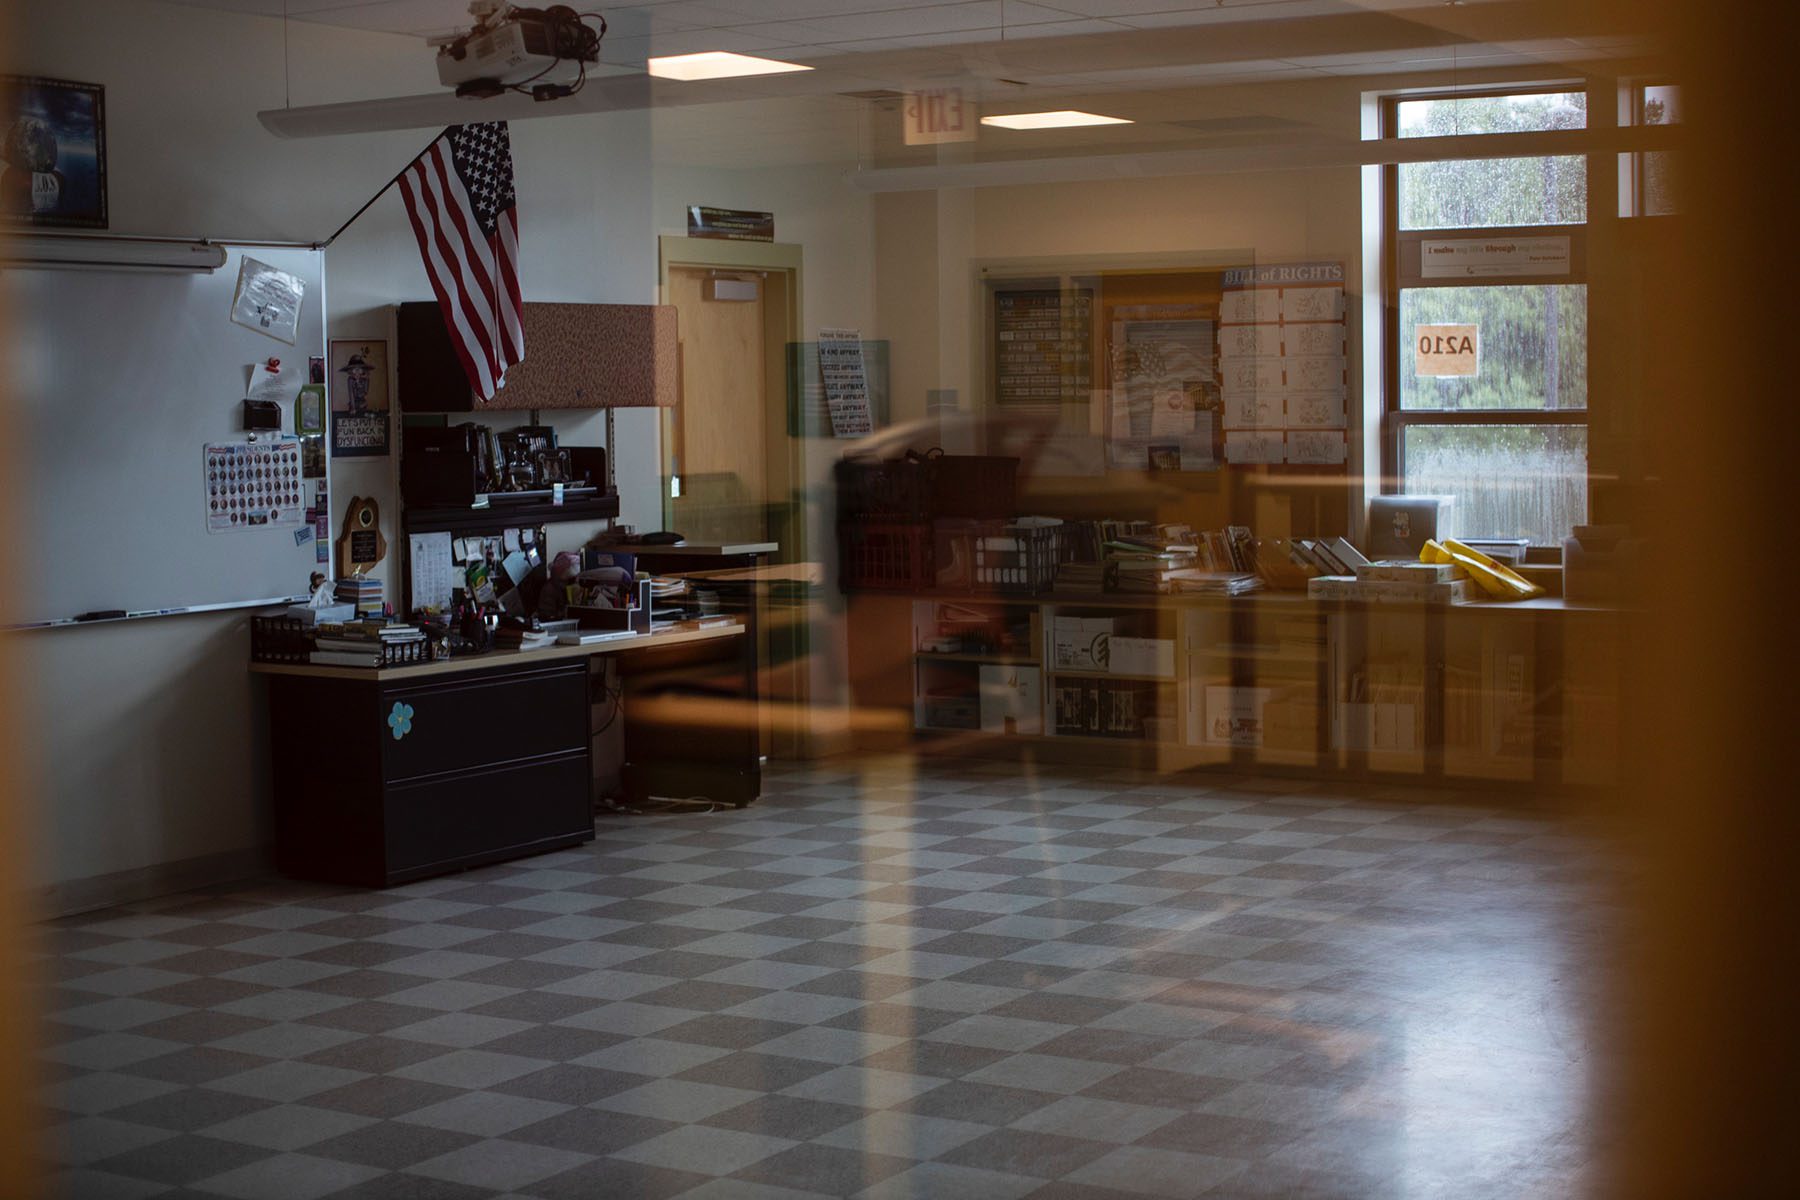 An American flag is seen in an empty classroom.